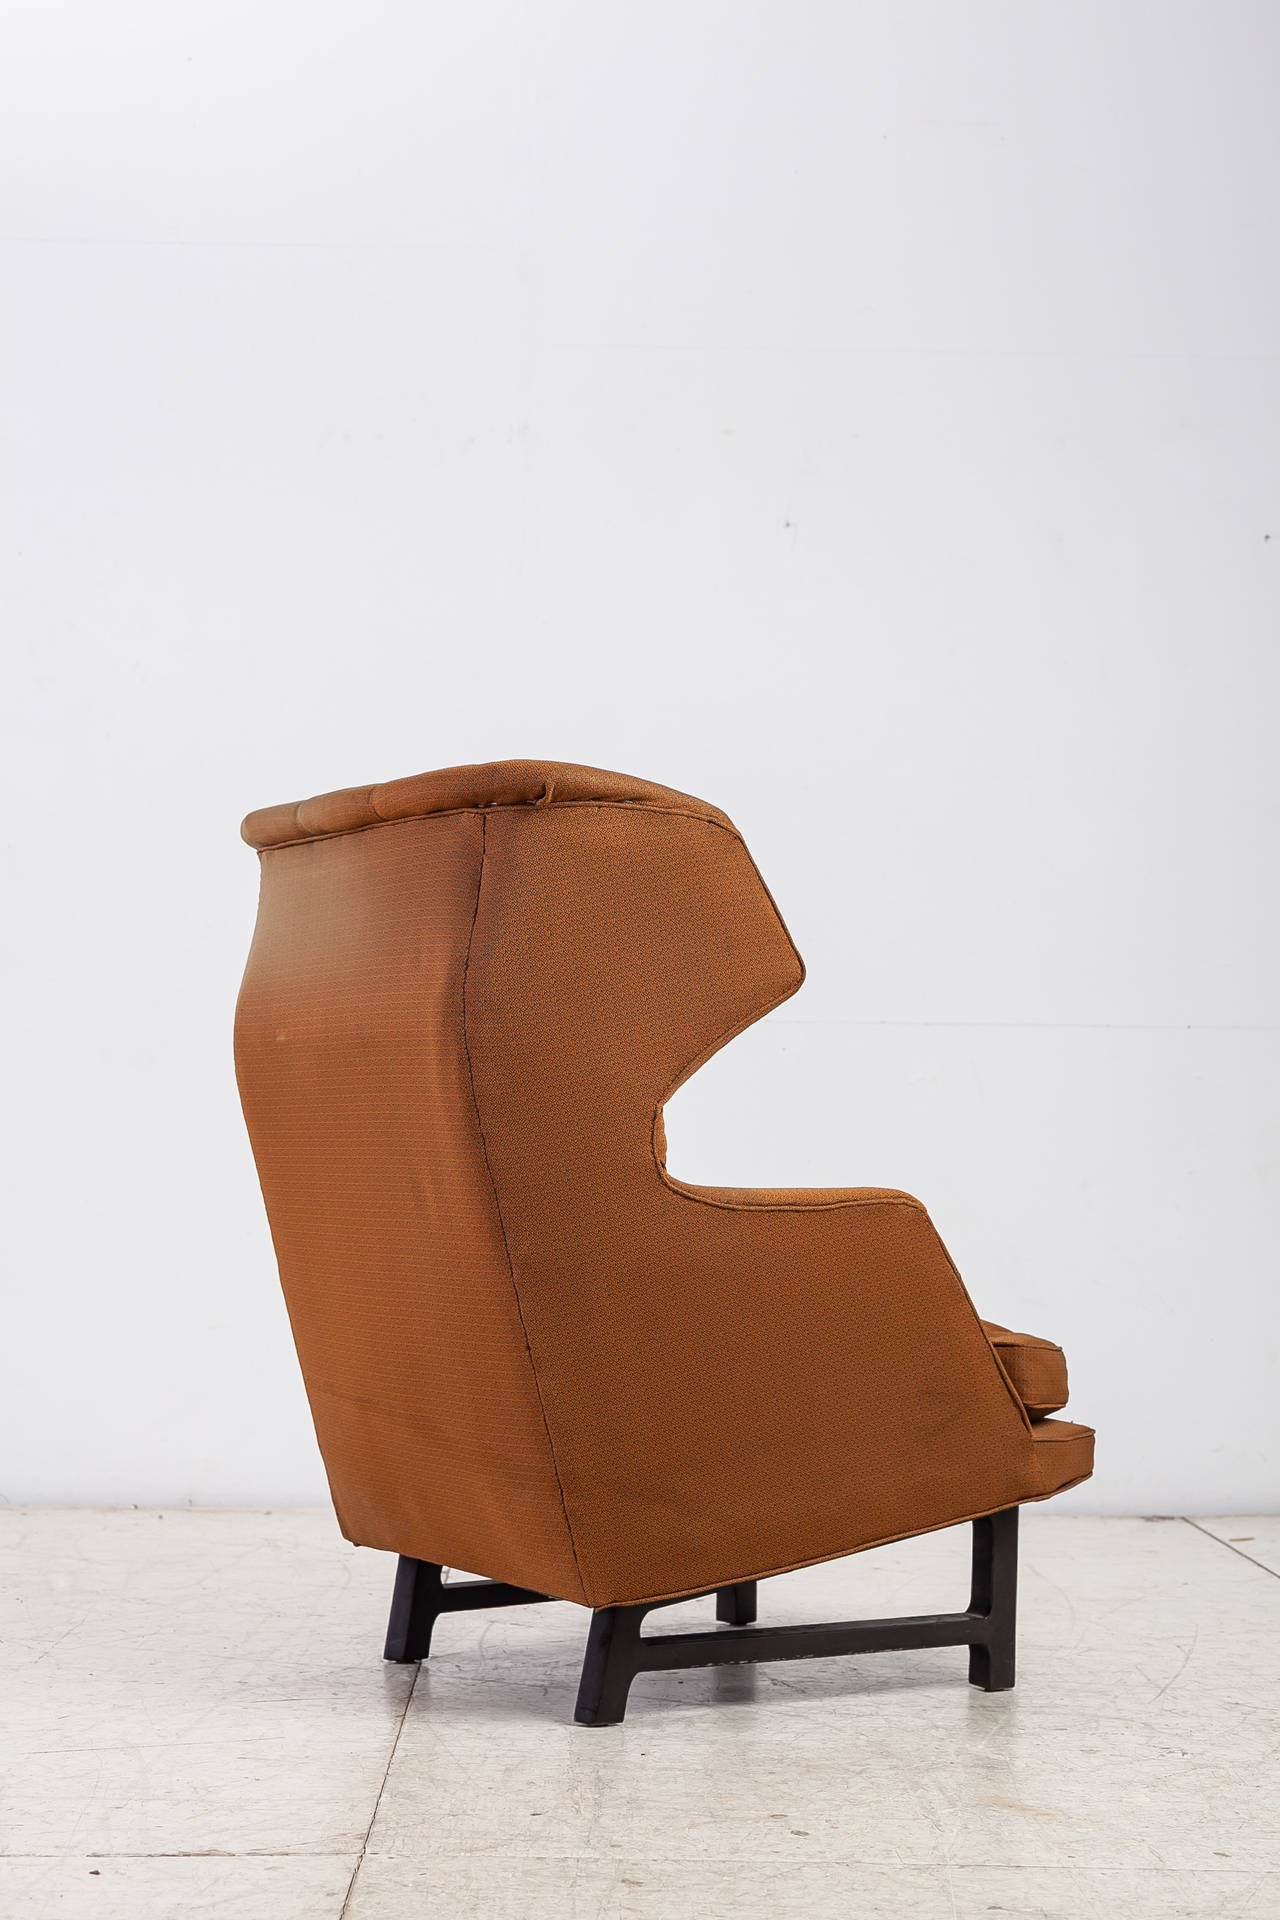 Mid-20th Century Edward Wormley Janus Wingback Lounge Chair for Dunbar For Sale